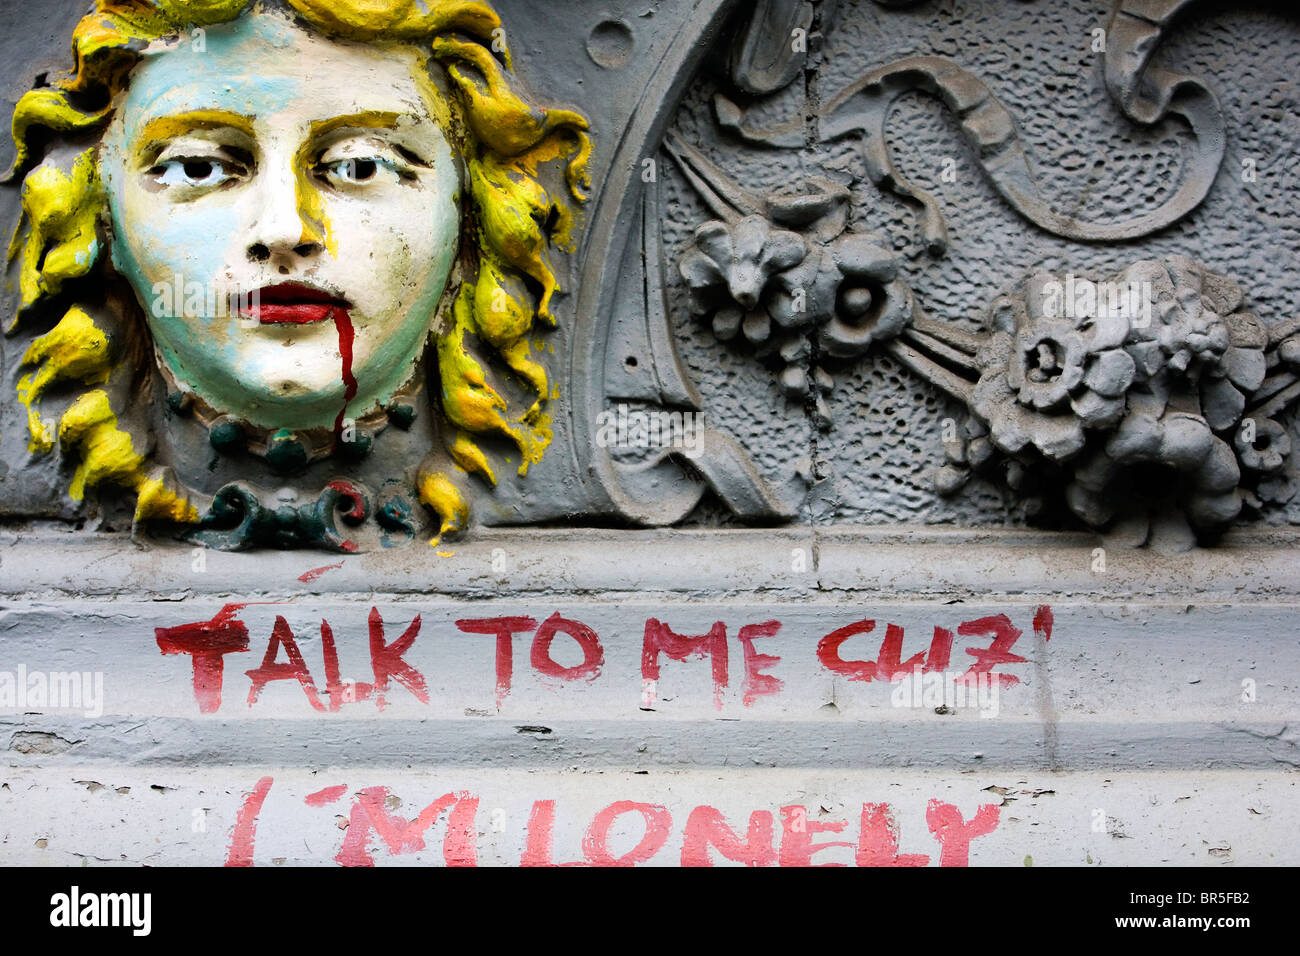 Part of a facade of a house in New York, with an antique sculpture and a writing 'Talk to me cuz' I'm lonely' Stock Photo